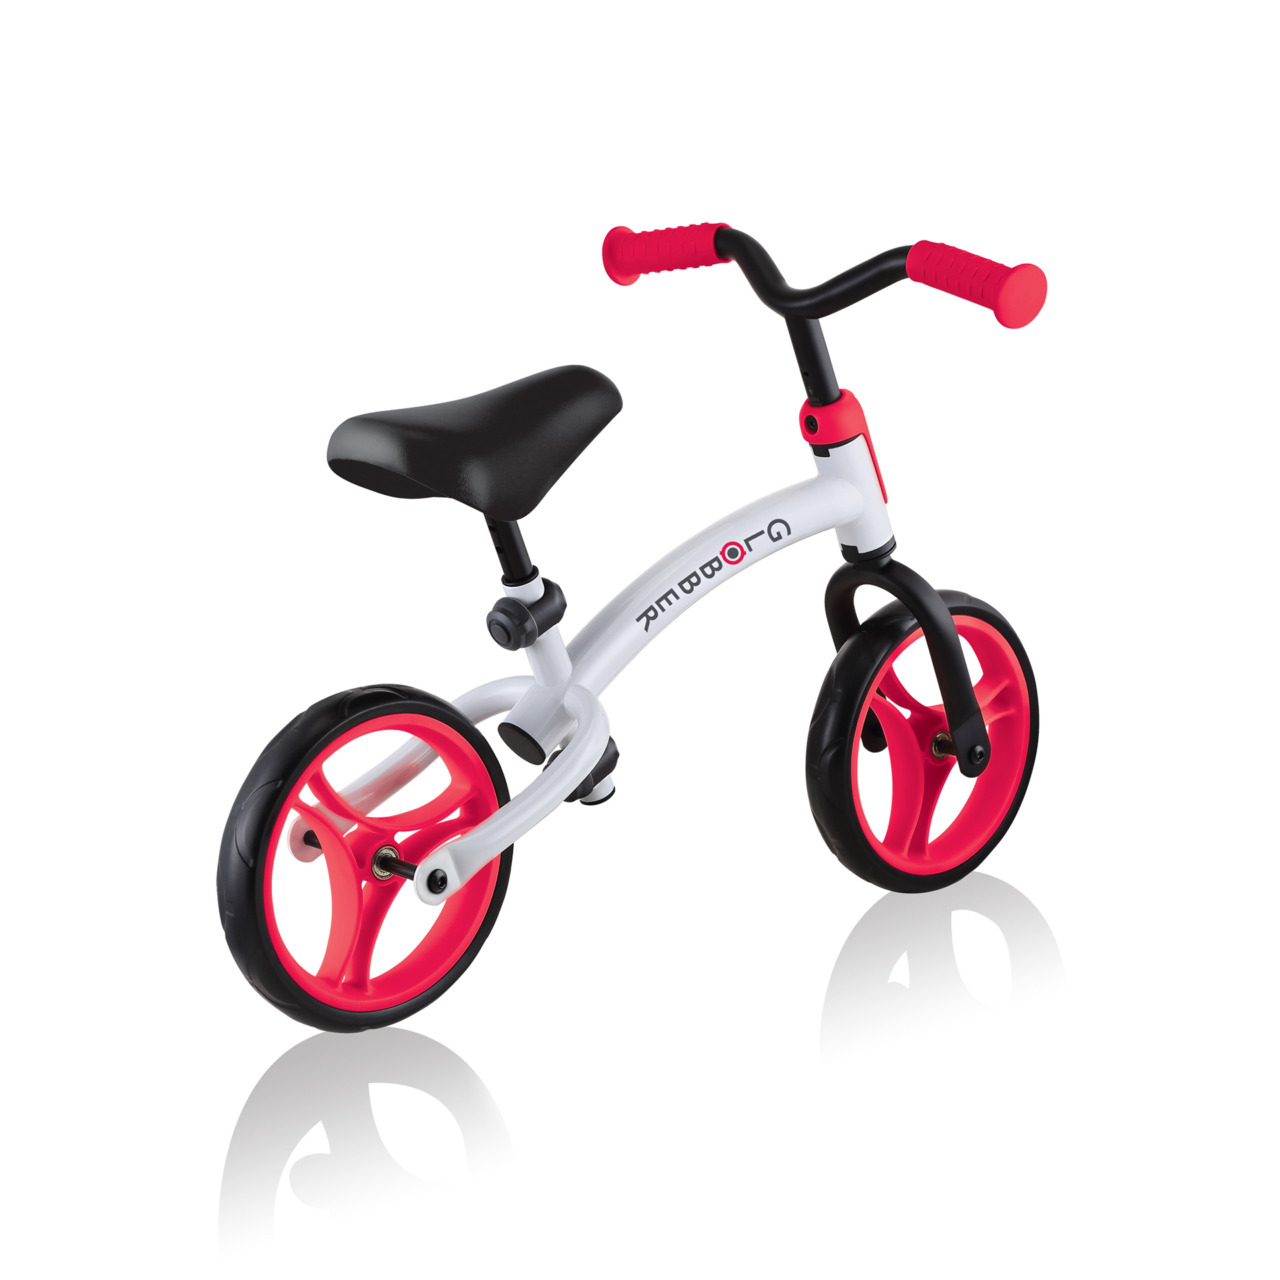 614 202 2 Adjustable White Red Balance Bike For Toddlers